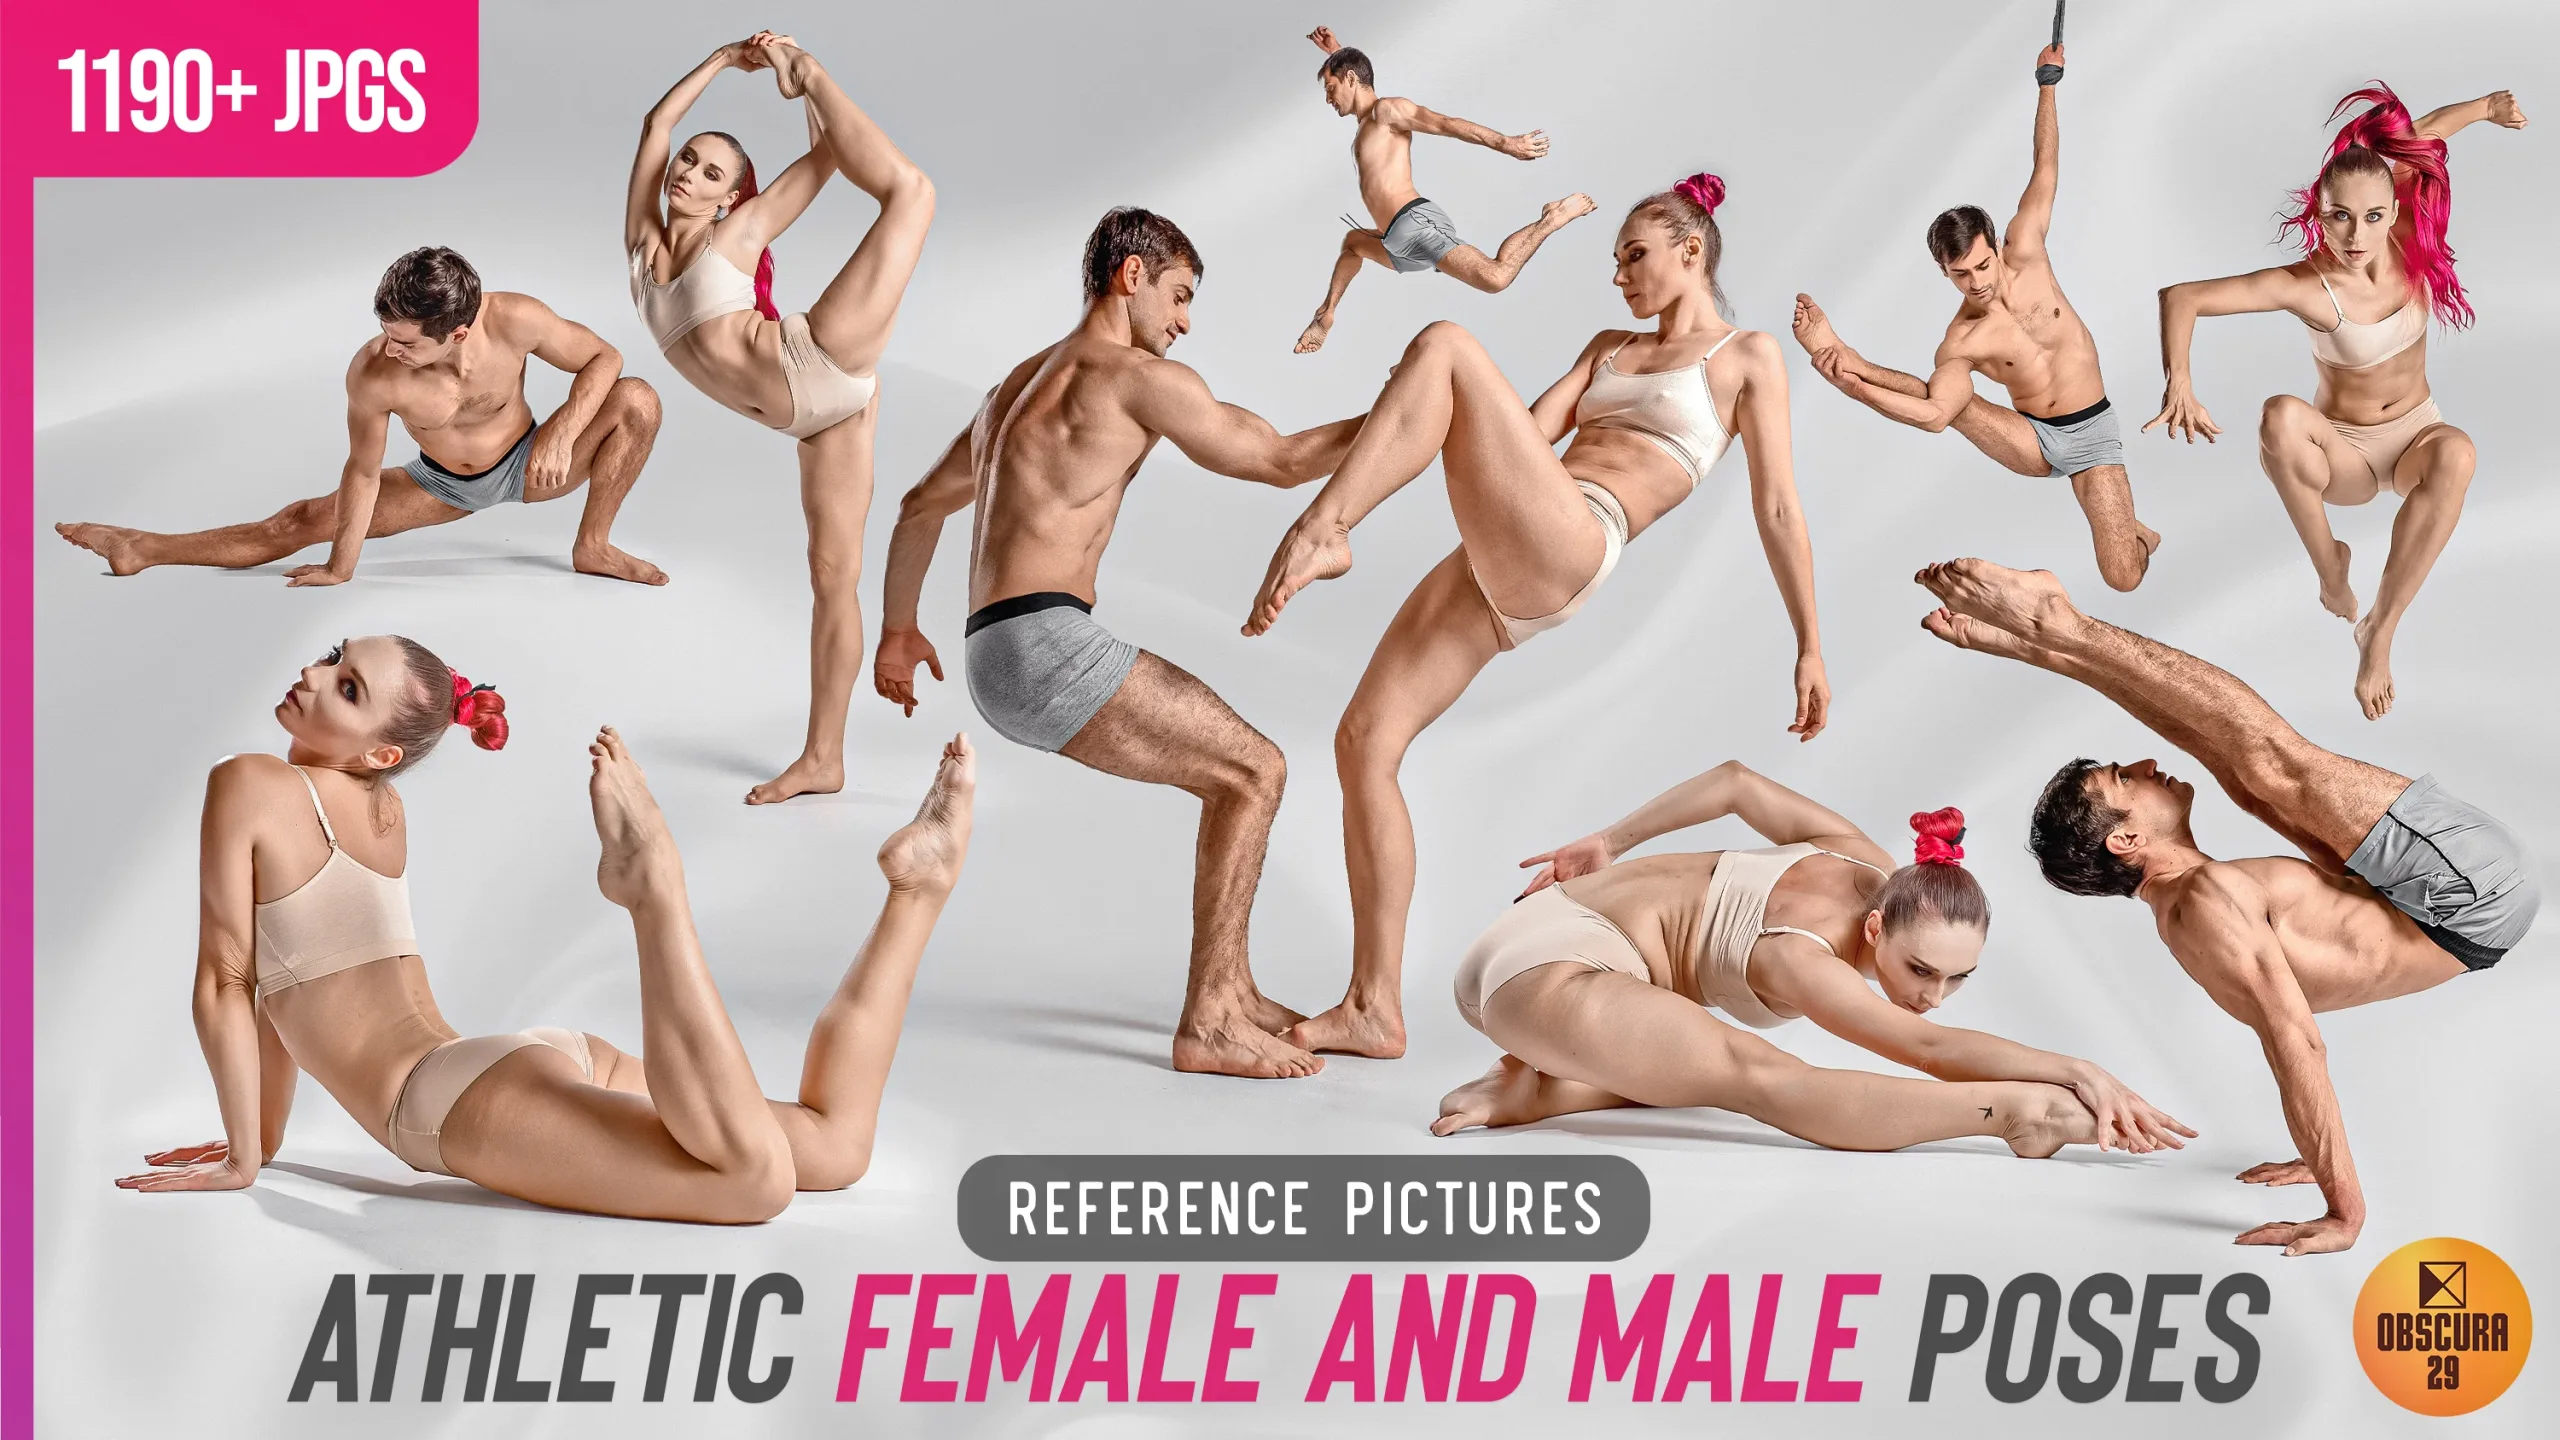 1190 Athletic Female and Male Poses Reference Pictures